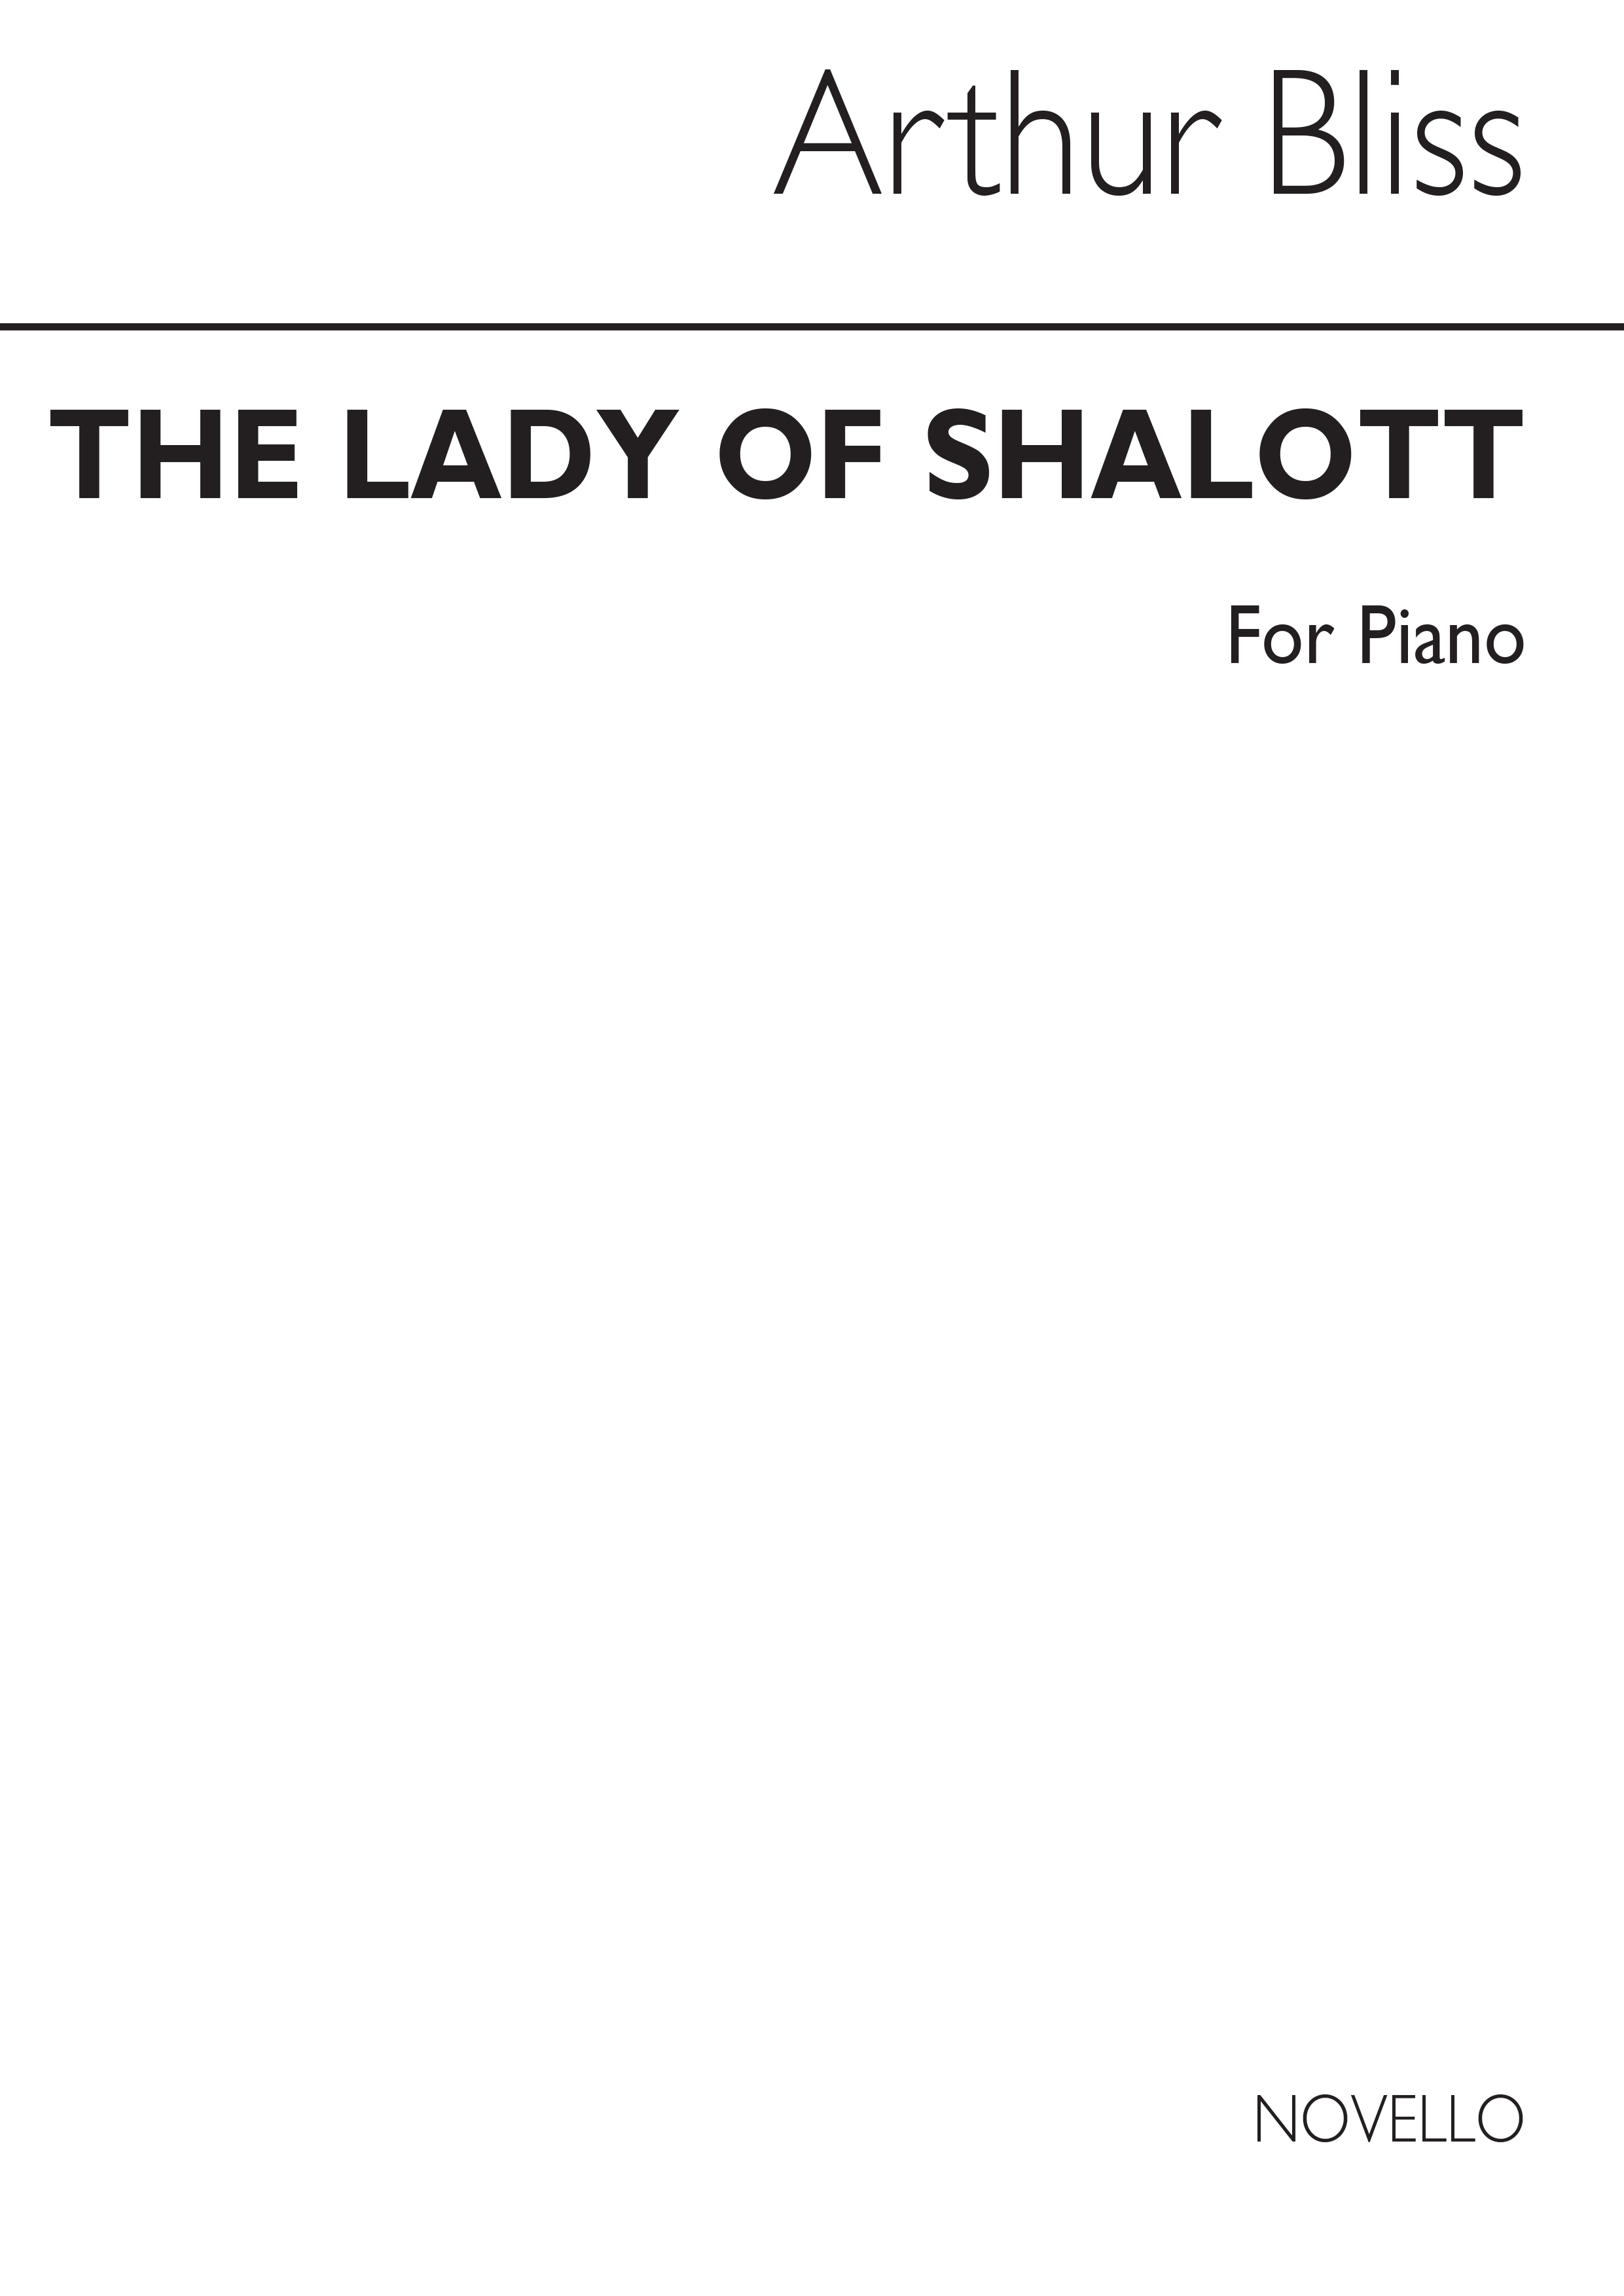 Bliss: Lady Of Shalott Excerpts for Piano